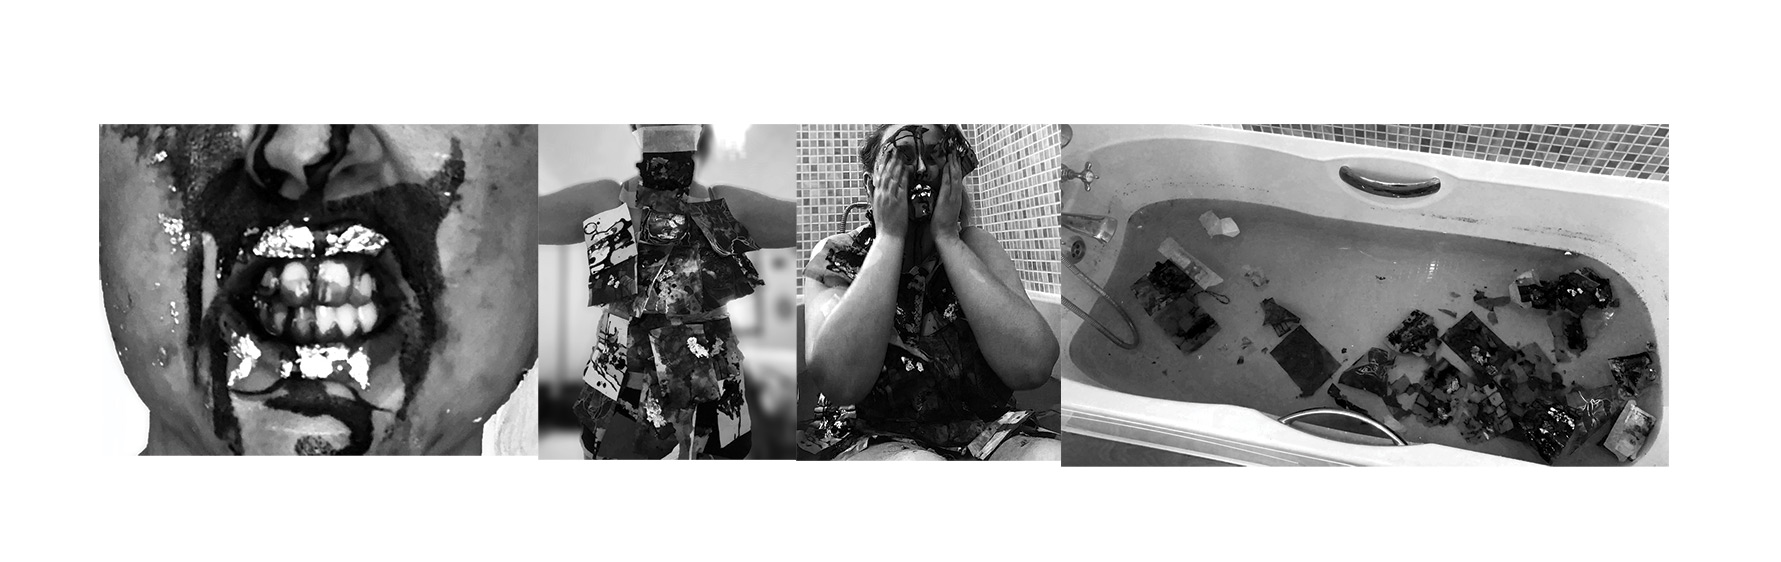 A series of 4 black and white images documenting a performance in the bath